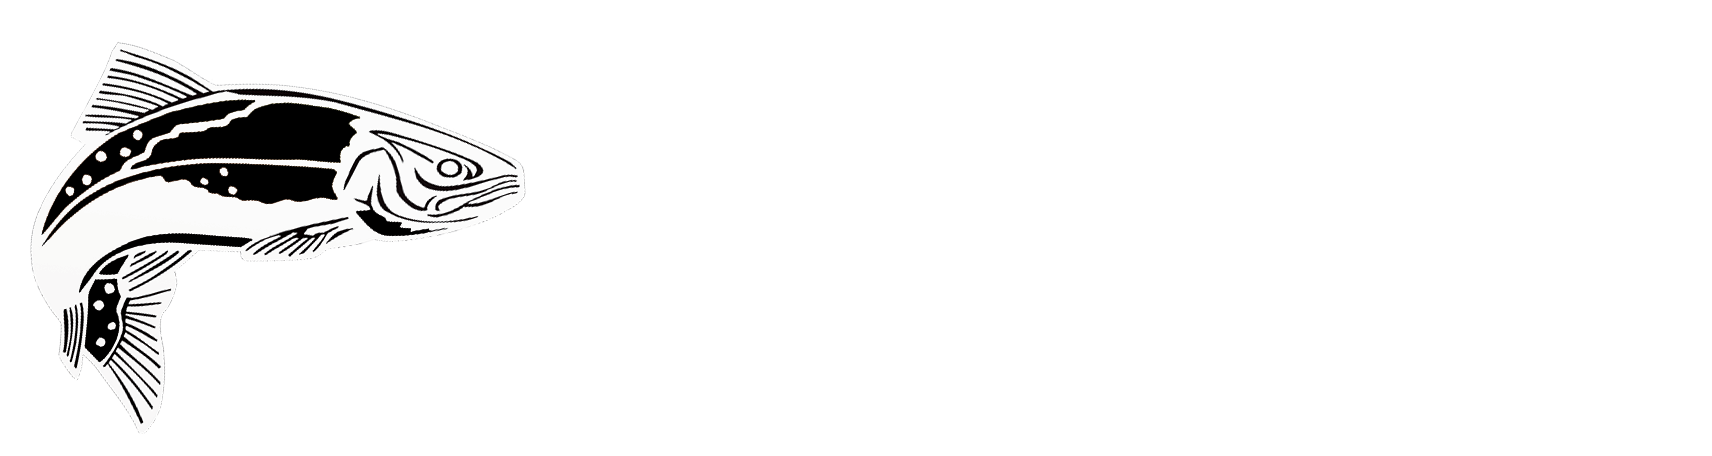 Native Fish Keepers, INC.